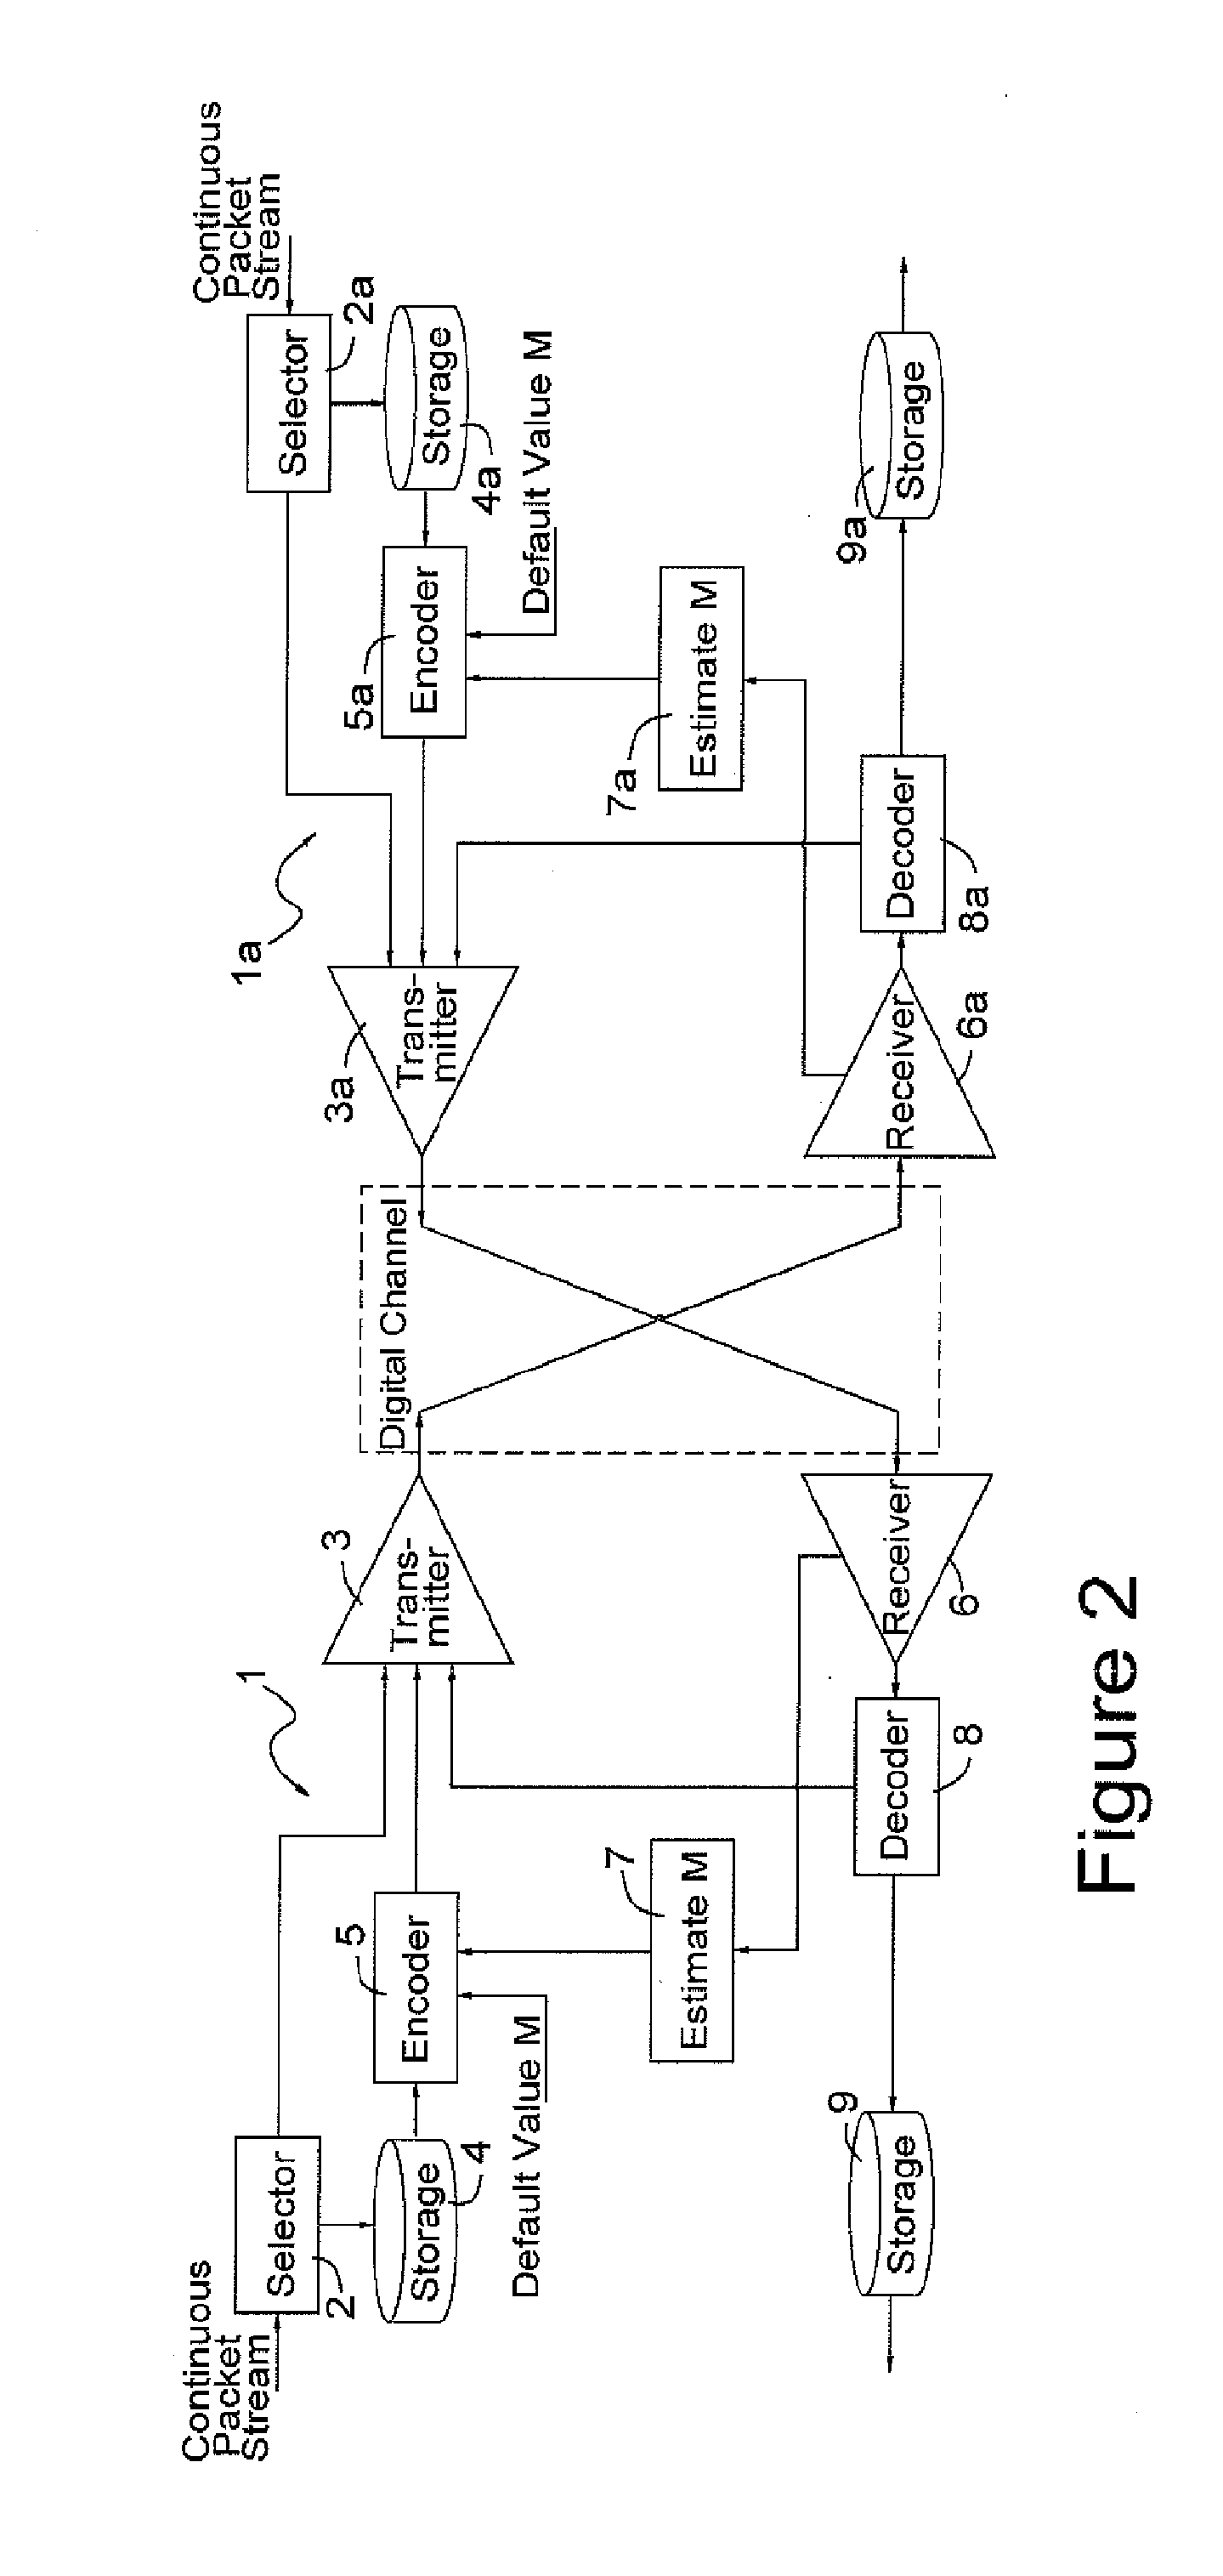 Method & apparatus for improving the performance of TCP and other network protocols in a communication network